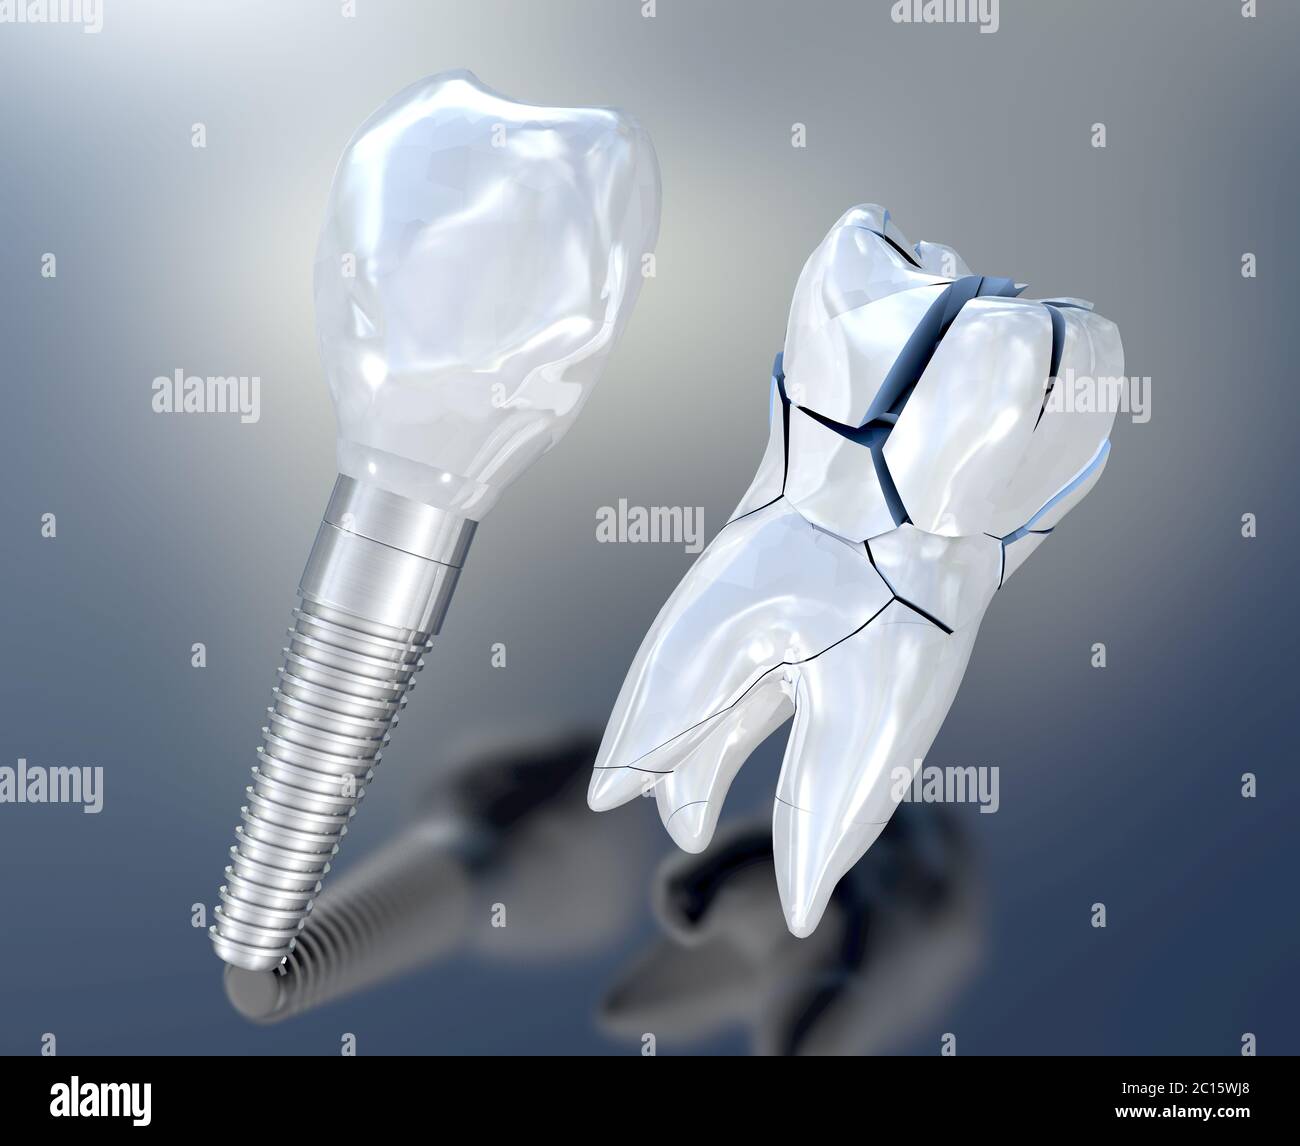 3d illustration of a broken white tooth an a tooth implant Stock Photo